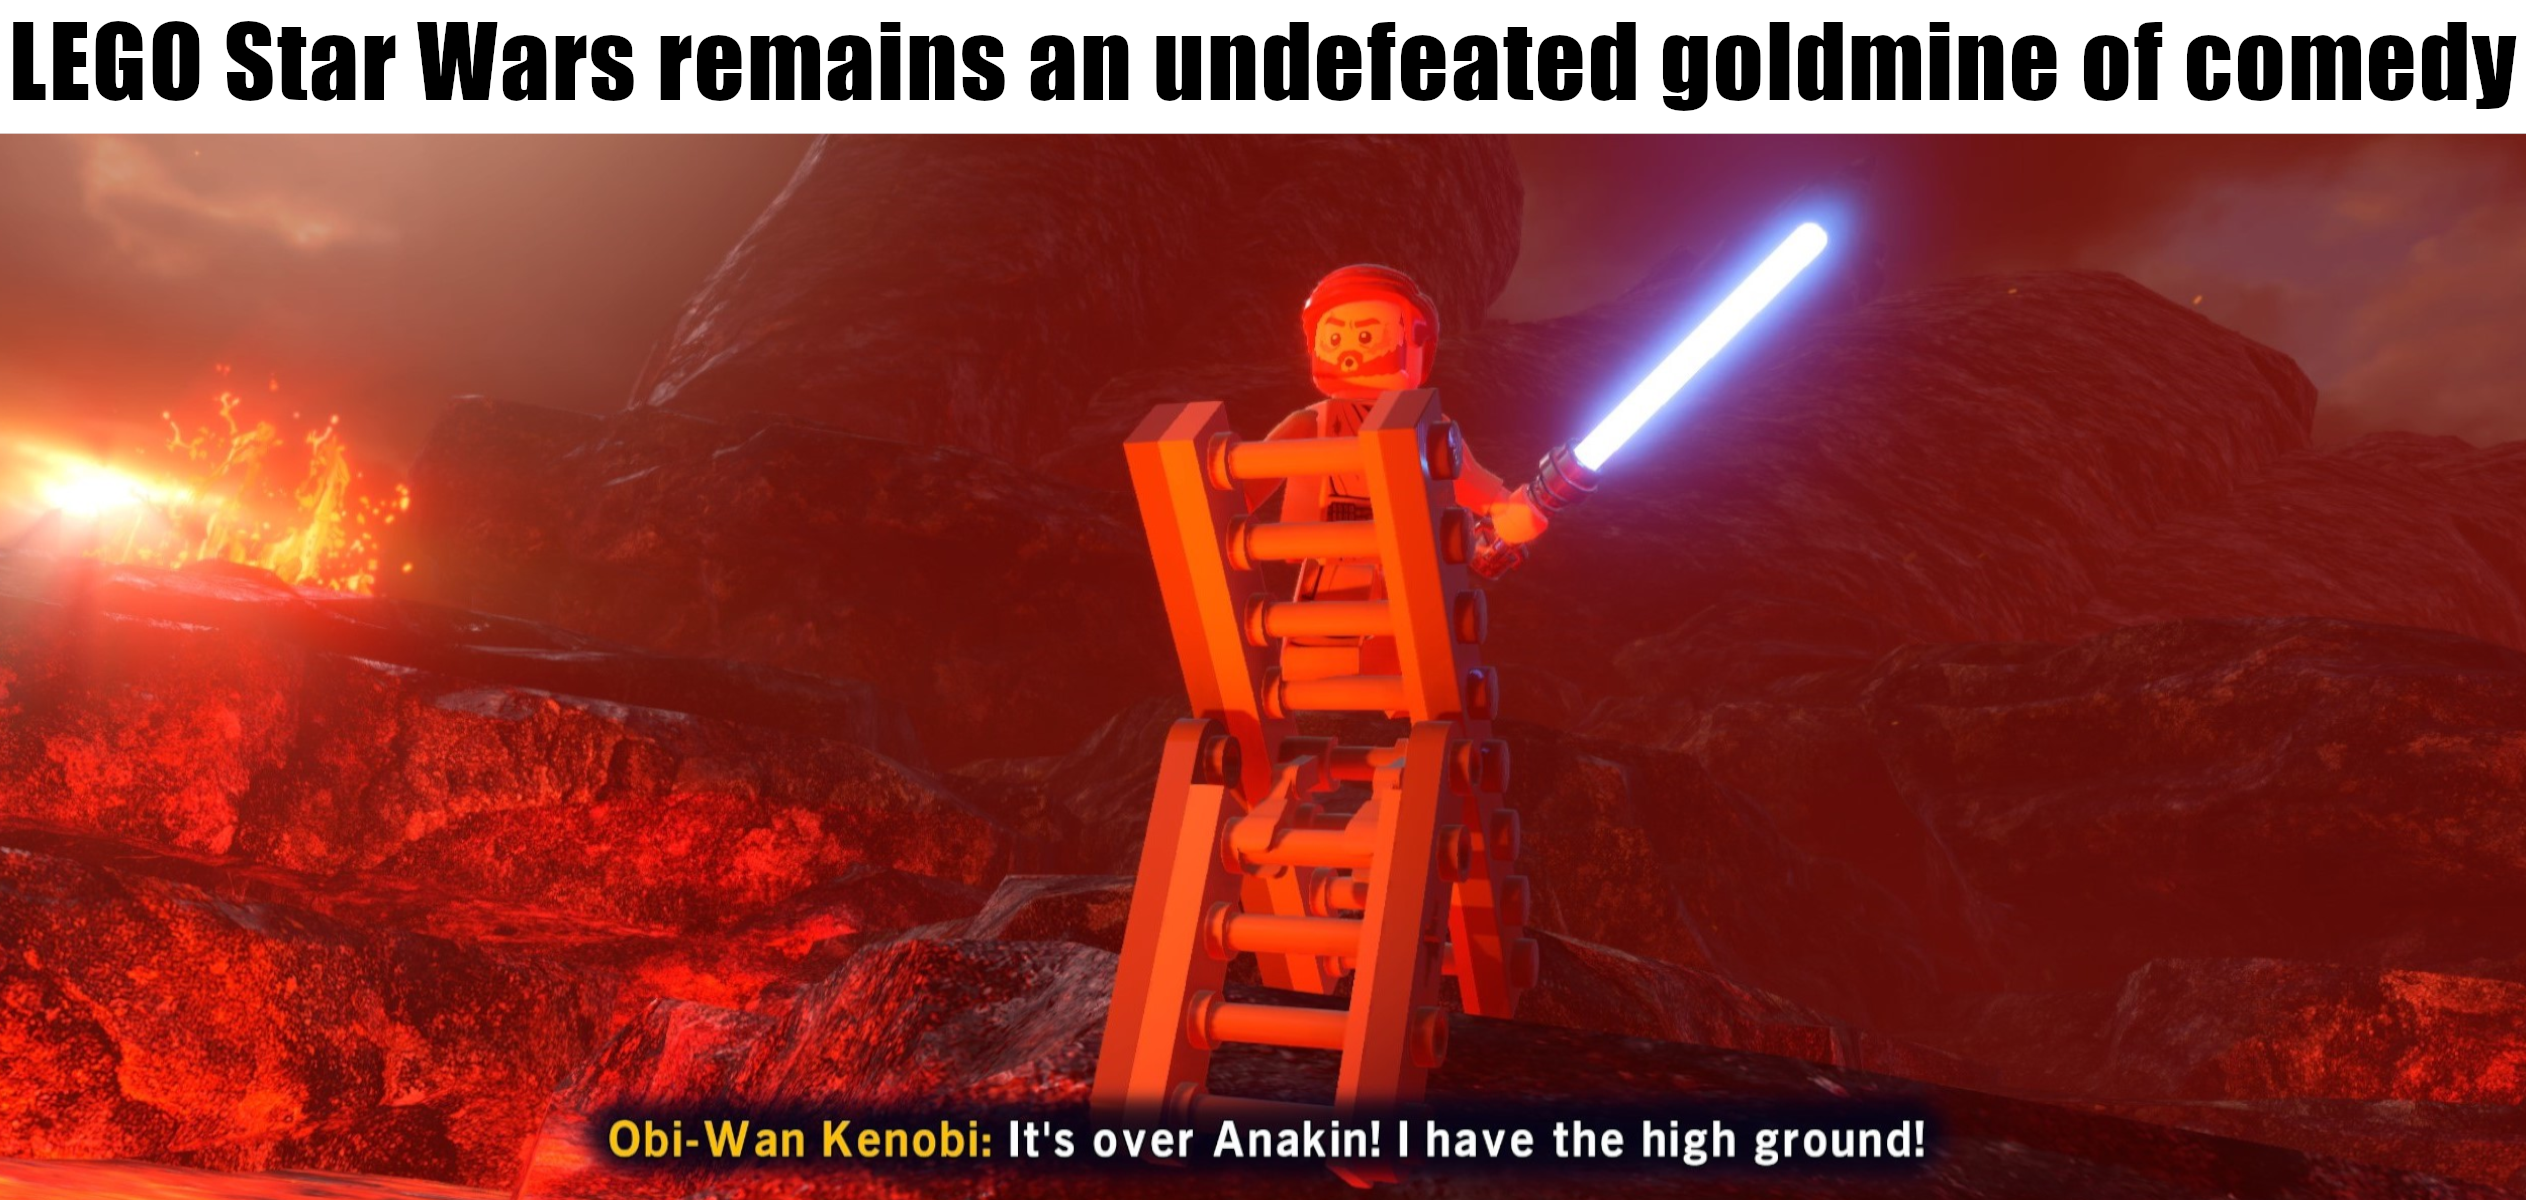 dank memes - funny memes - statutory warning - Lego Star Wars remains an undefeated goldmine of comedy ObiWan Kenobi It's over Anakin! I have the high ground!